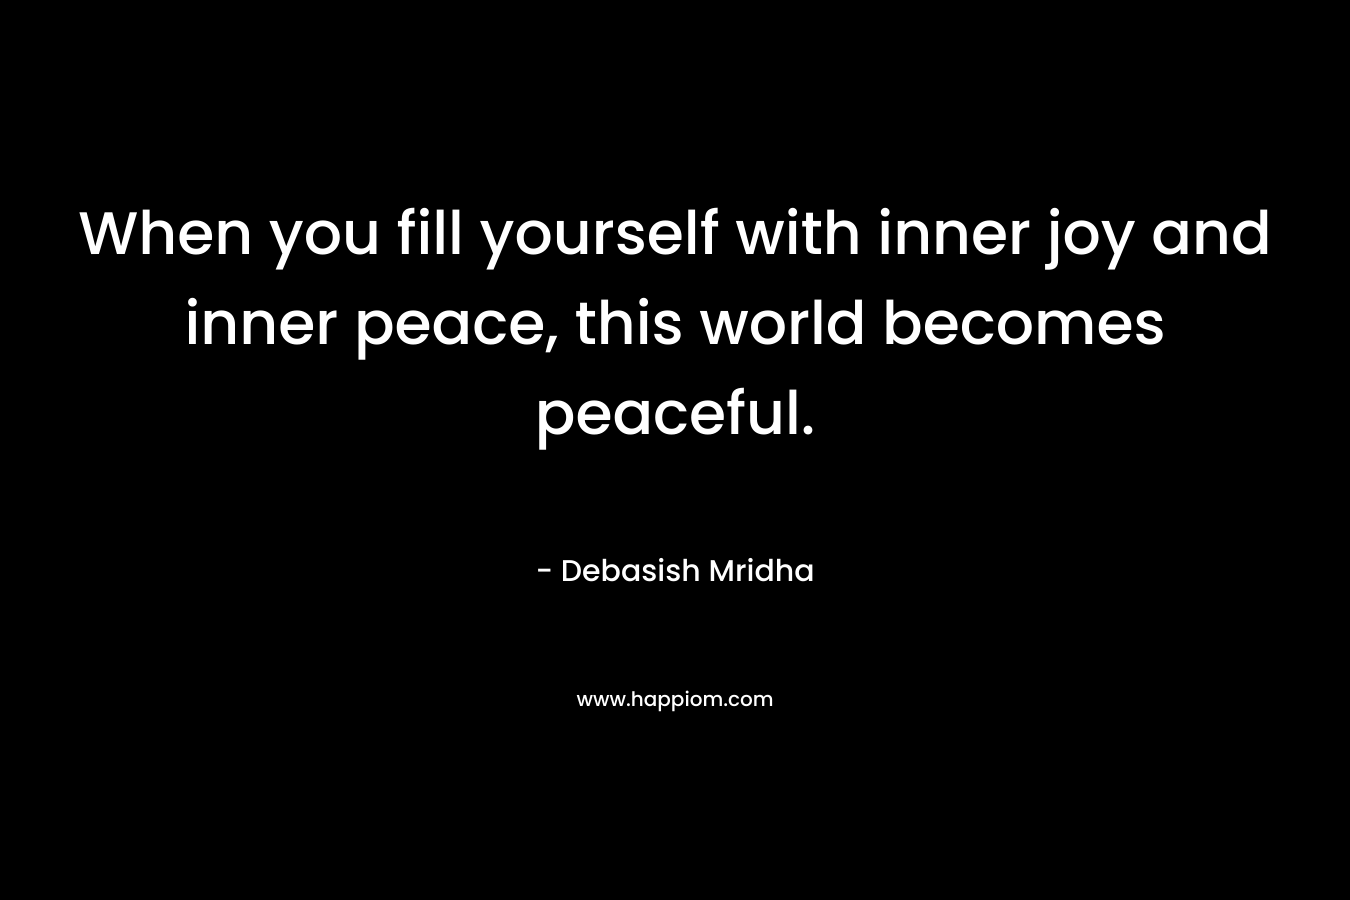 When you fill yourself with inner joy and inner peace, this world becomes peaceful.